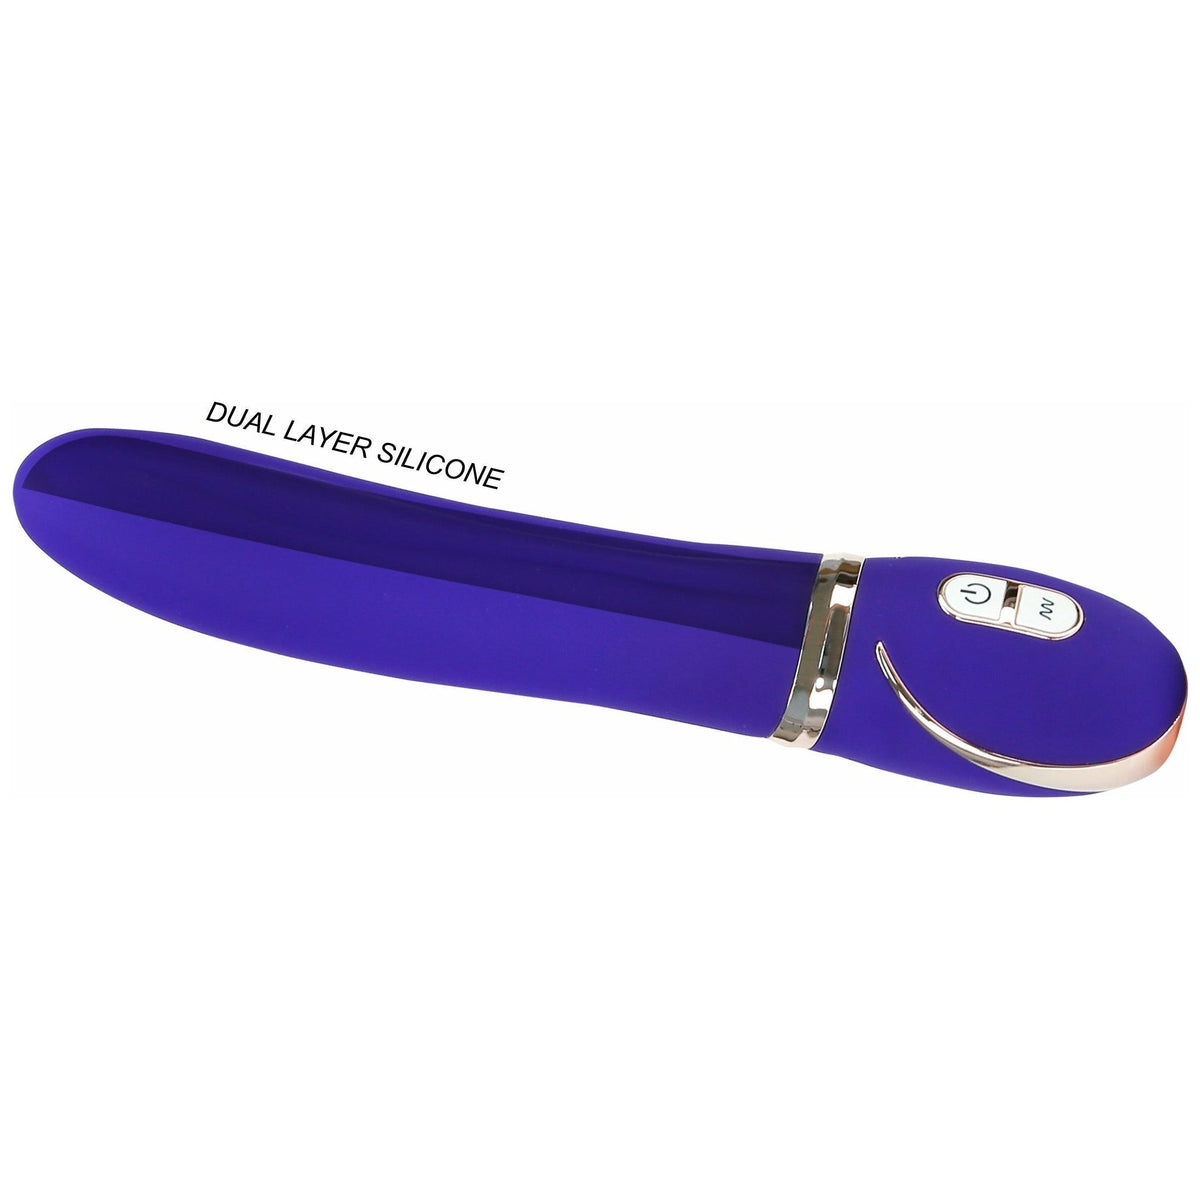 Vibe Couture Glam Up Rechargeable Vibrator - Purple